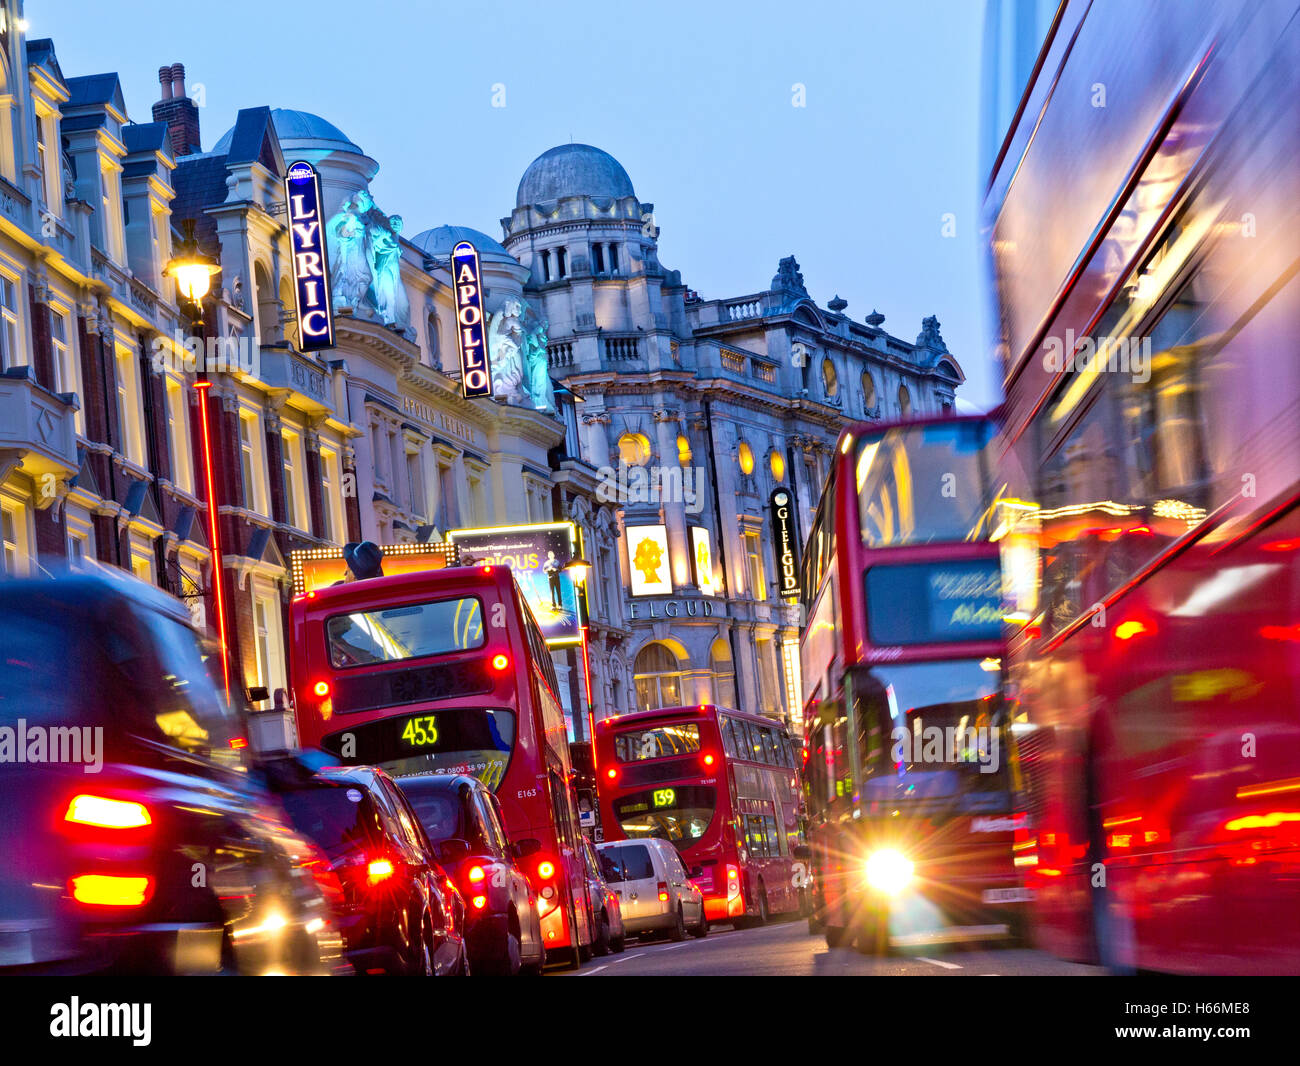 SHAFTESBURY AVENUE NIGHT LONDON TRAFFIC  Theatreland West End theatres busy heavy pollution diesel fumes gridlock with red buses  taxis and private vehicles in Shaftesbury Avenue at dusk West End London UK Stock Photo